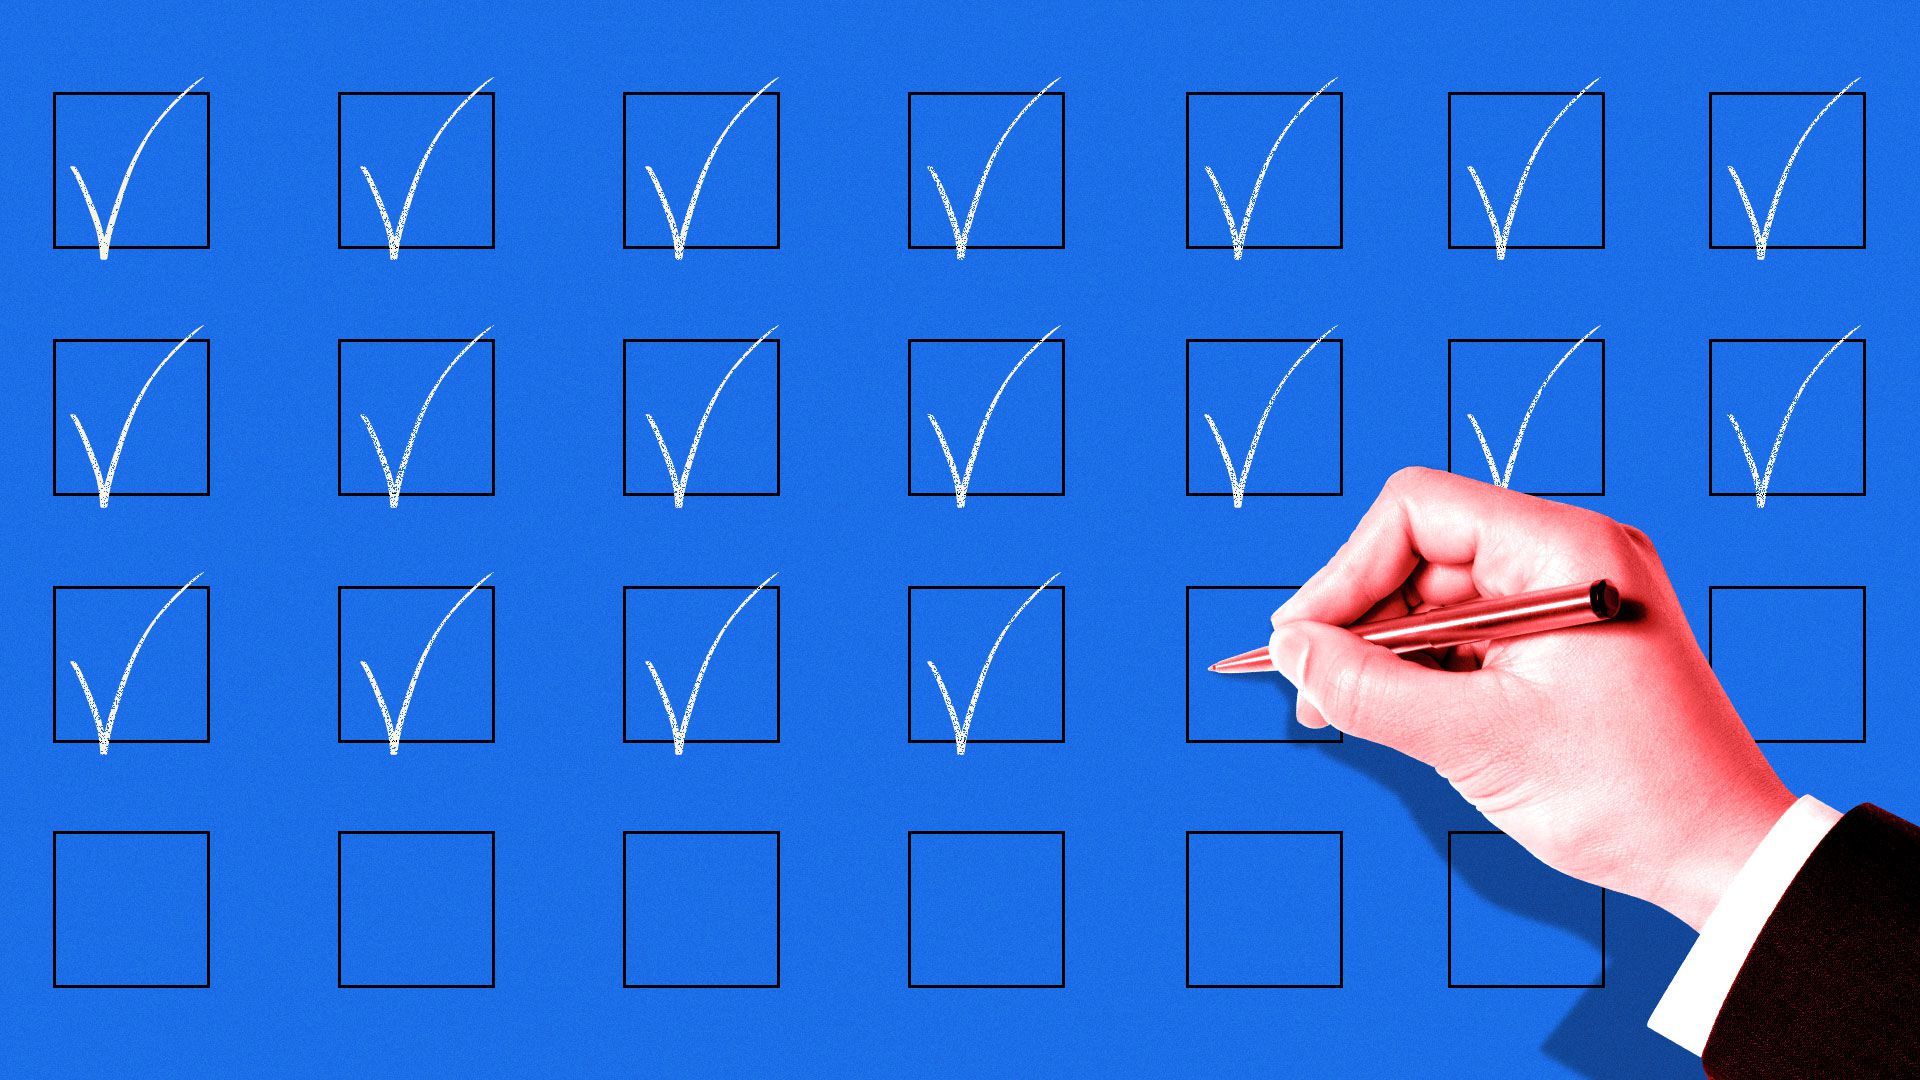 Illustration of a pattern of checkboxes filled with checkmarks, with a hand that's about to fill an empty checkbox